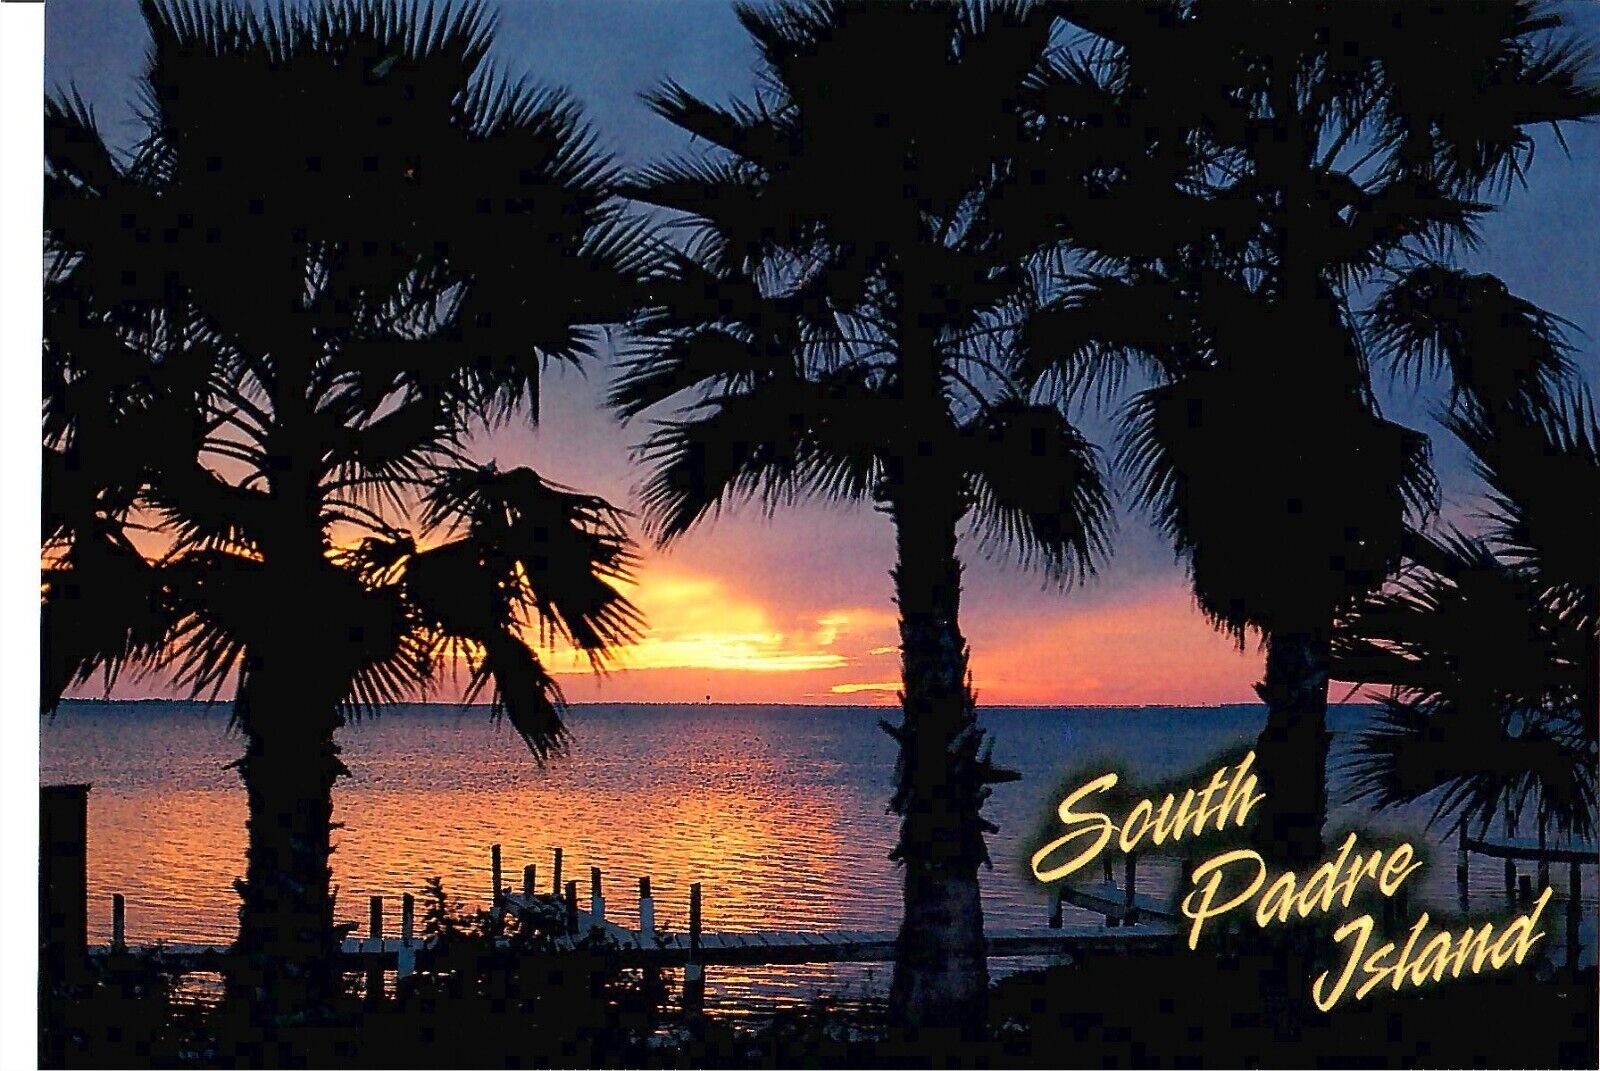 NEW Postcard South Padre Island Texas palm trees 4x6 Postcrossing Collector